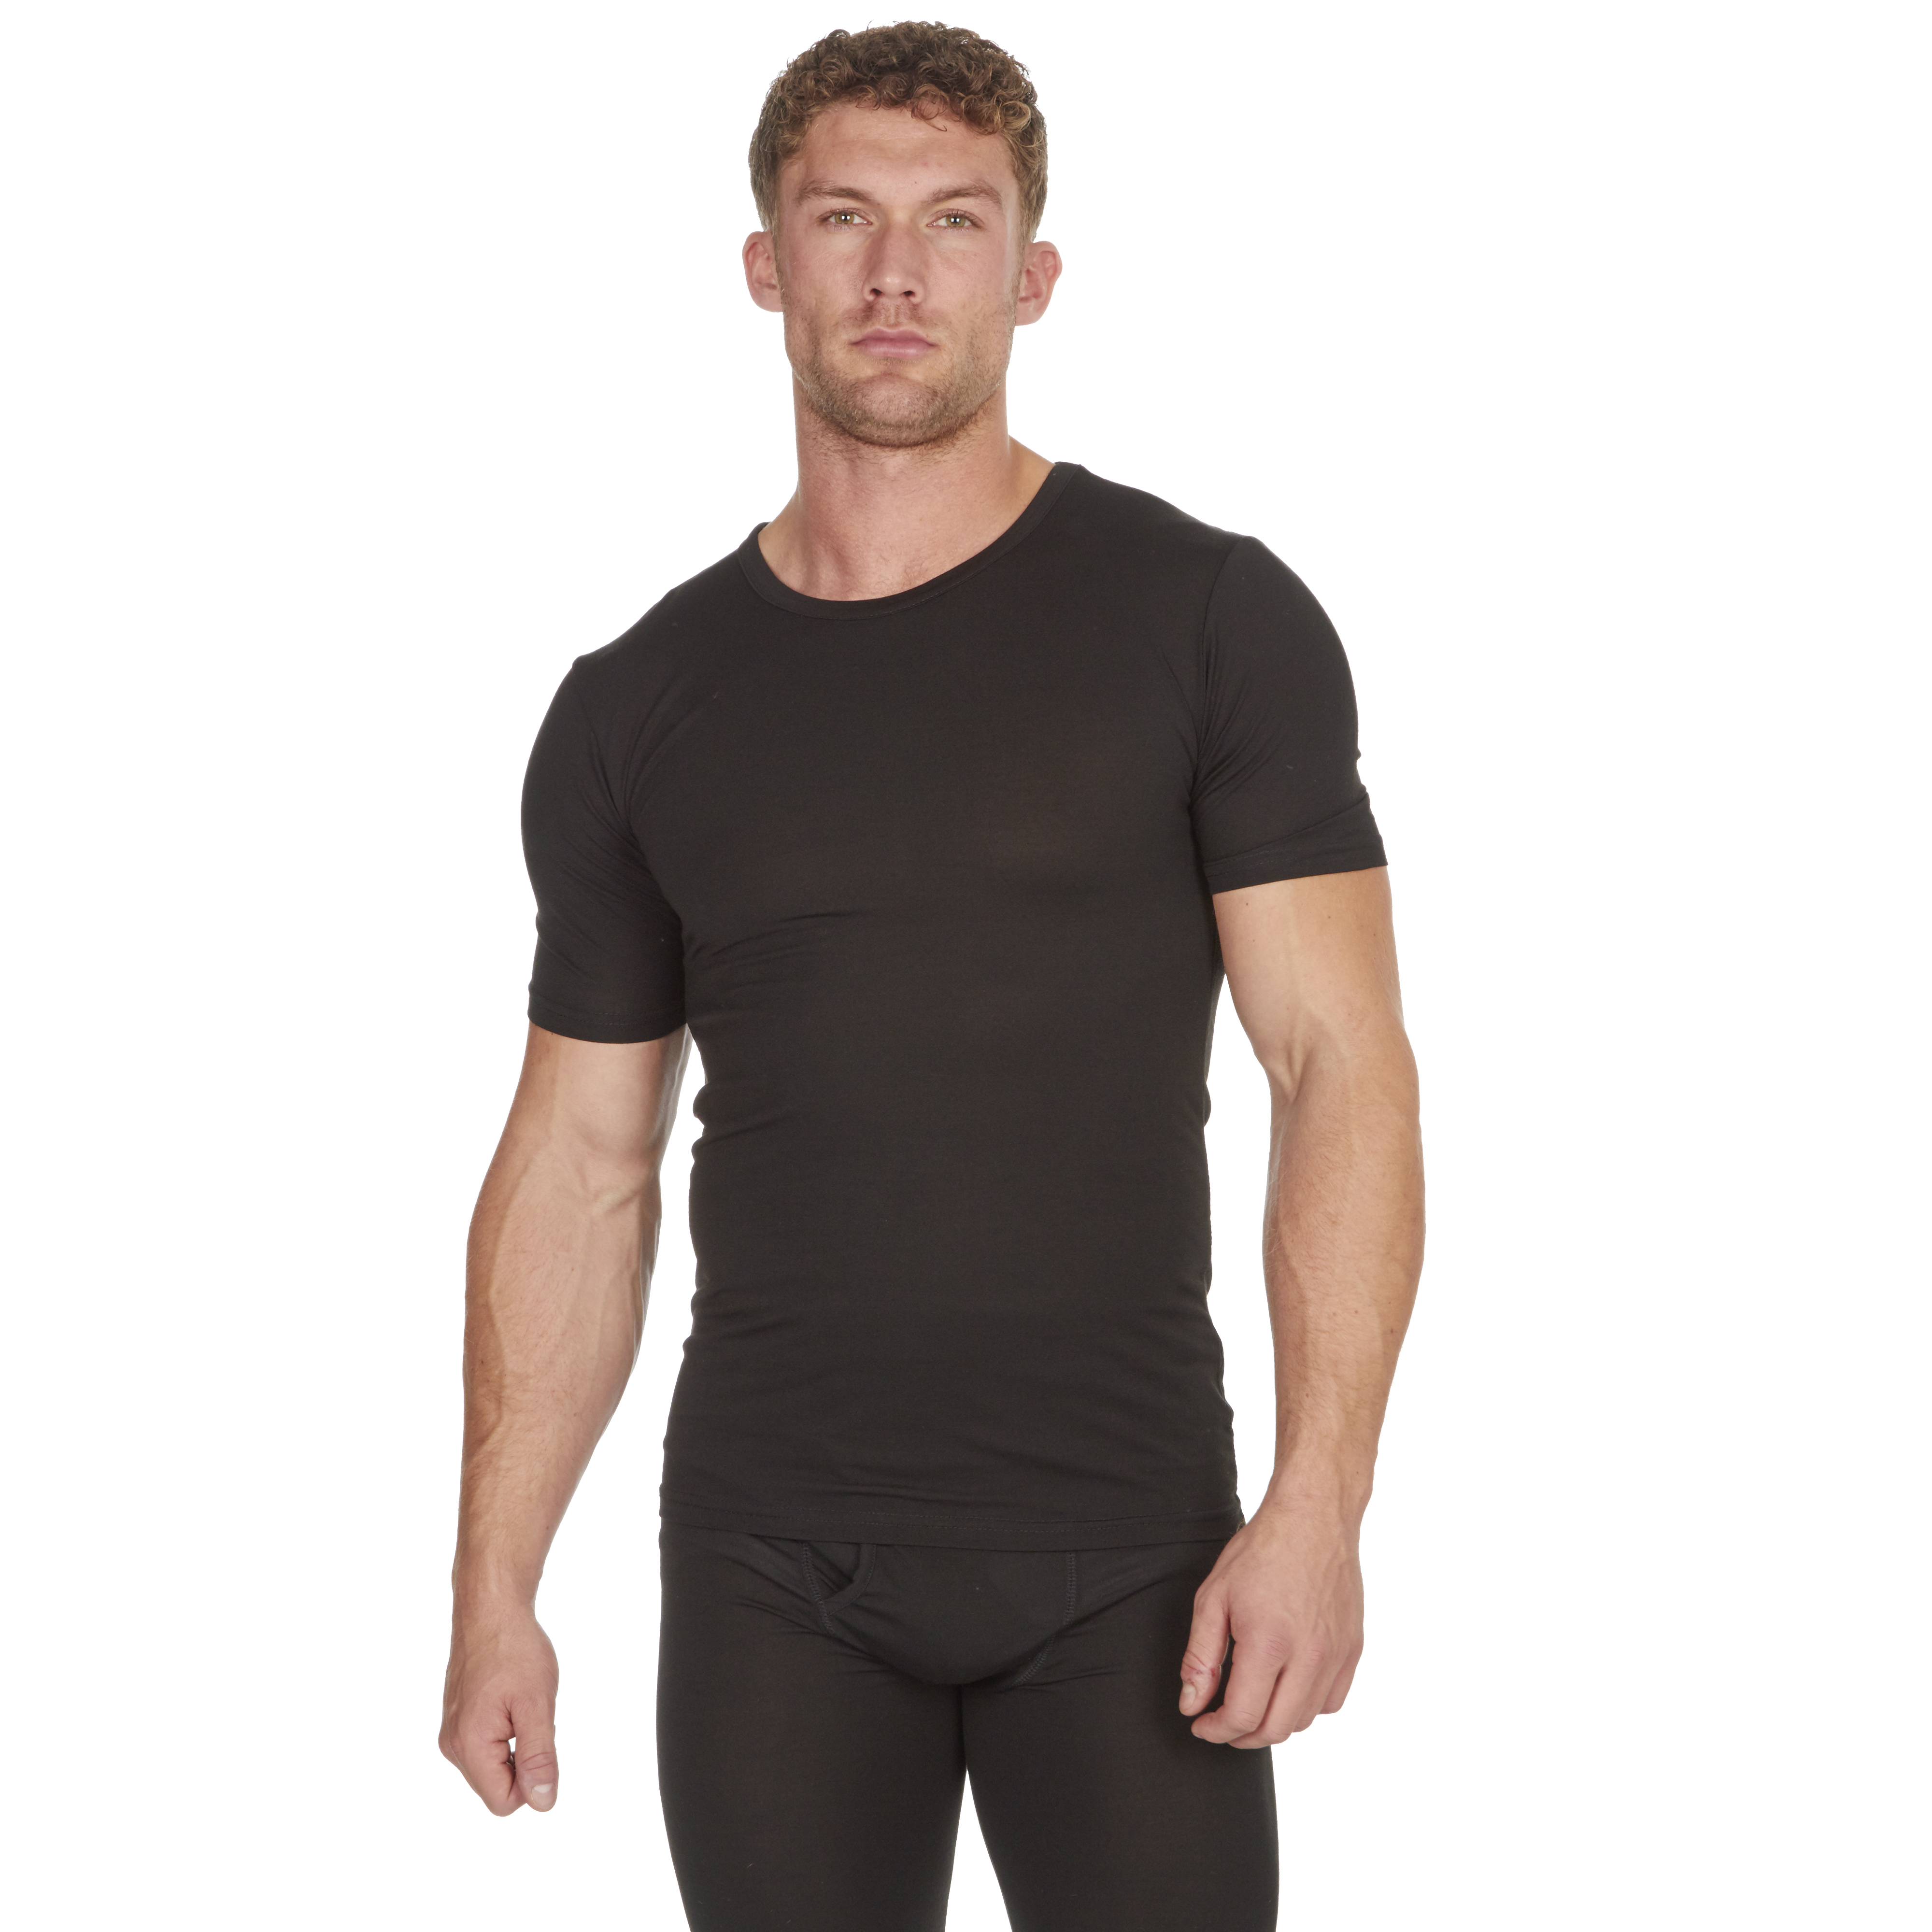 Mens Thermal Top Short Sleeve T-shirt Warm Breathable Soft Winter Work S-2XL